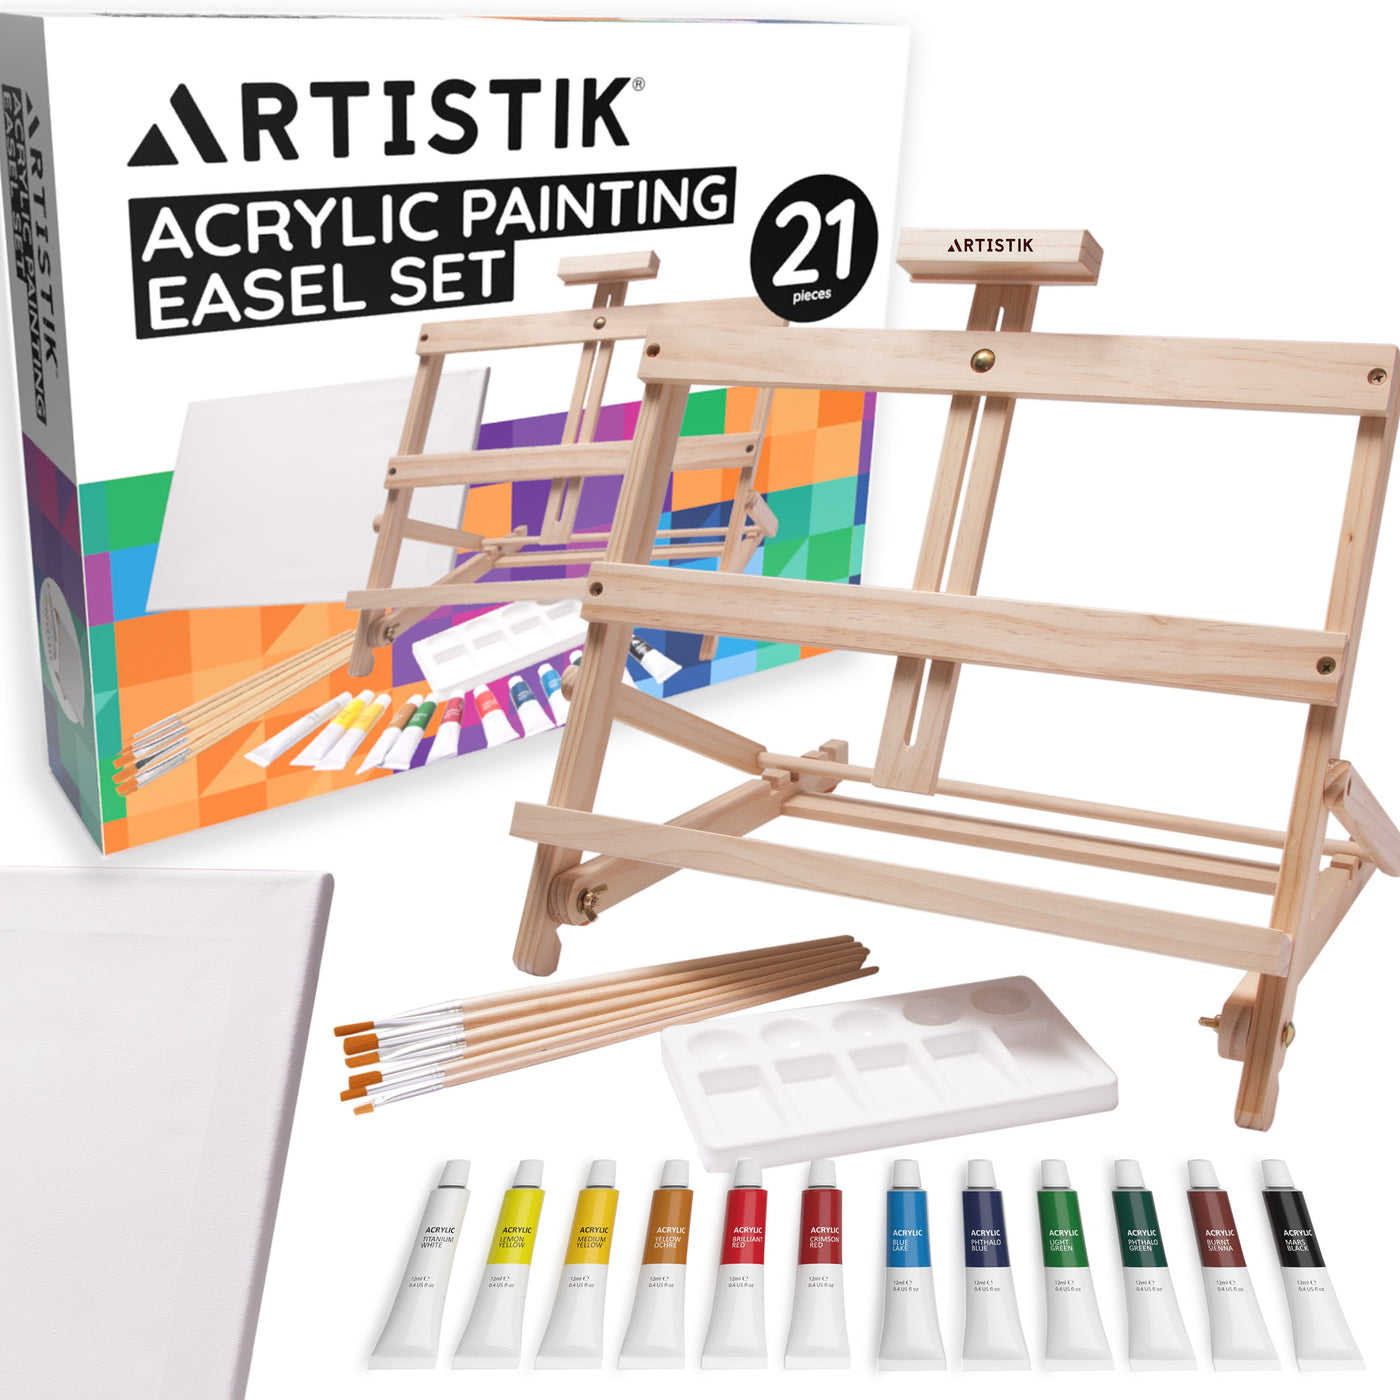 Acrylic Painting Easel Set - 21 Pieces